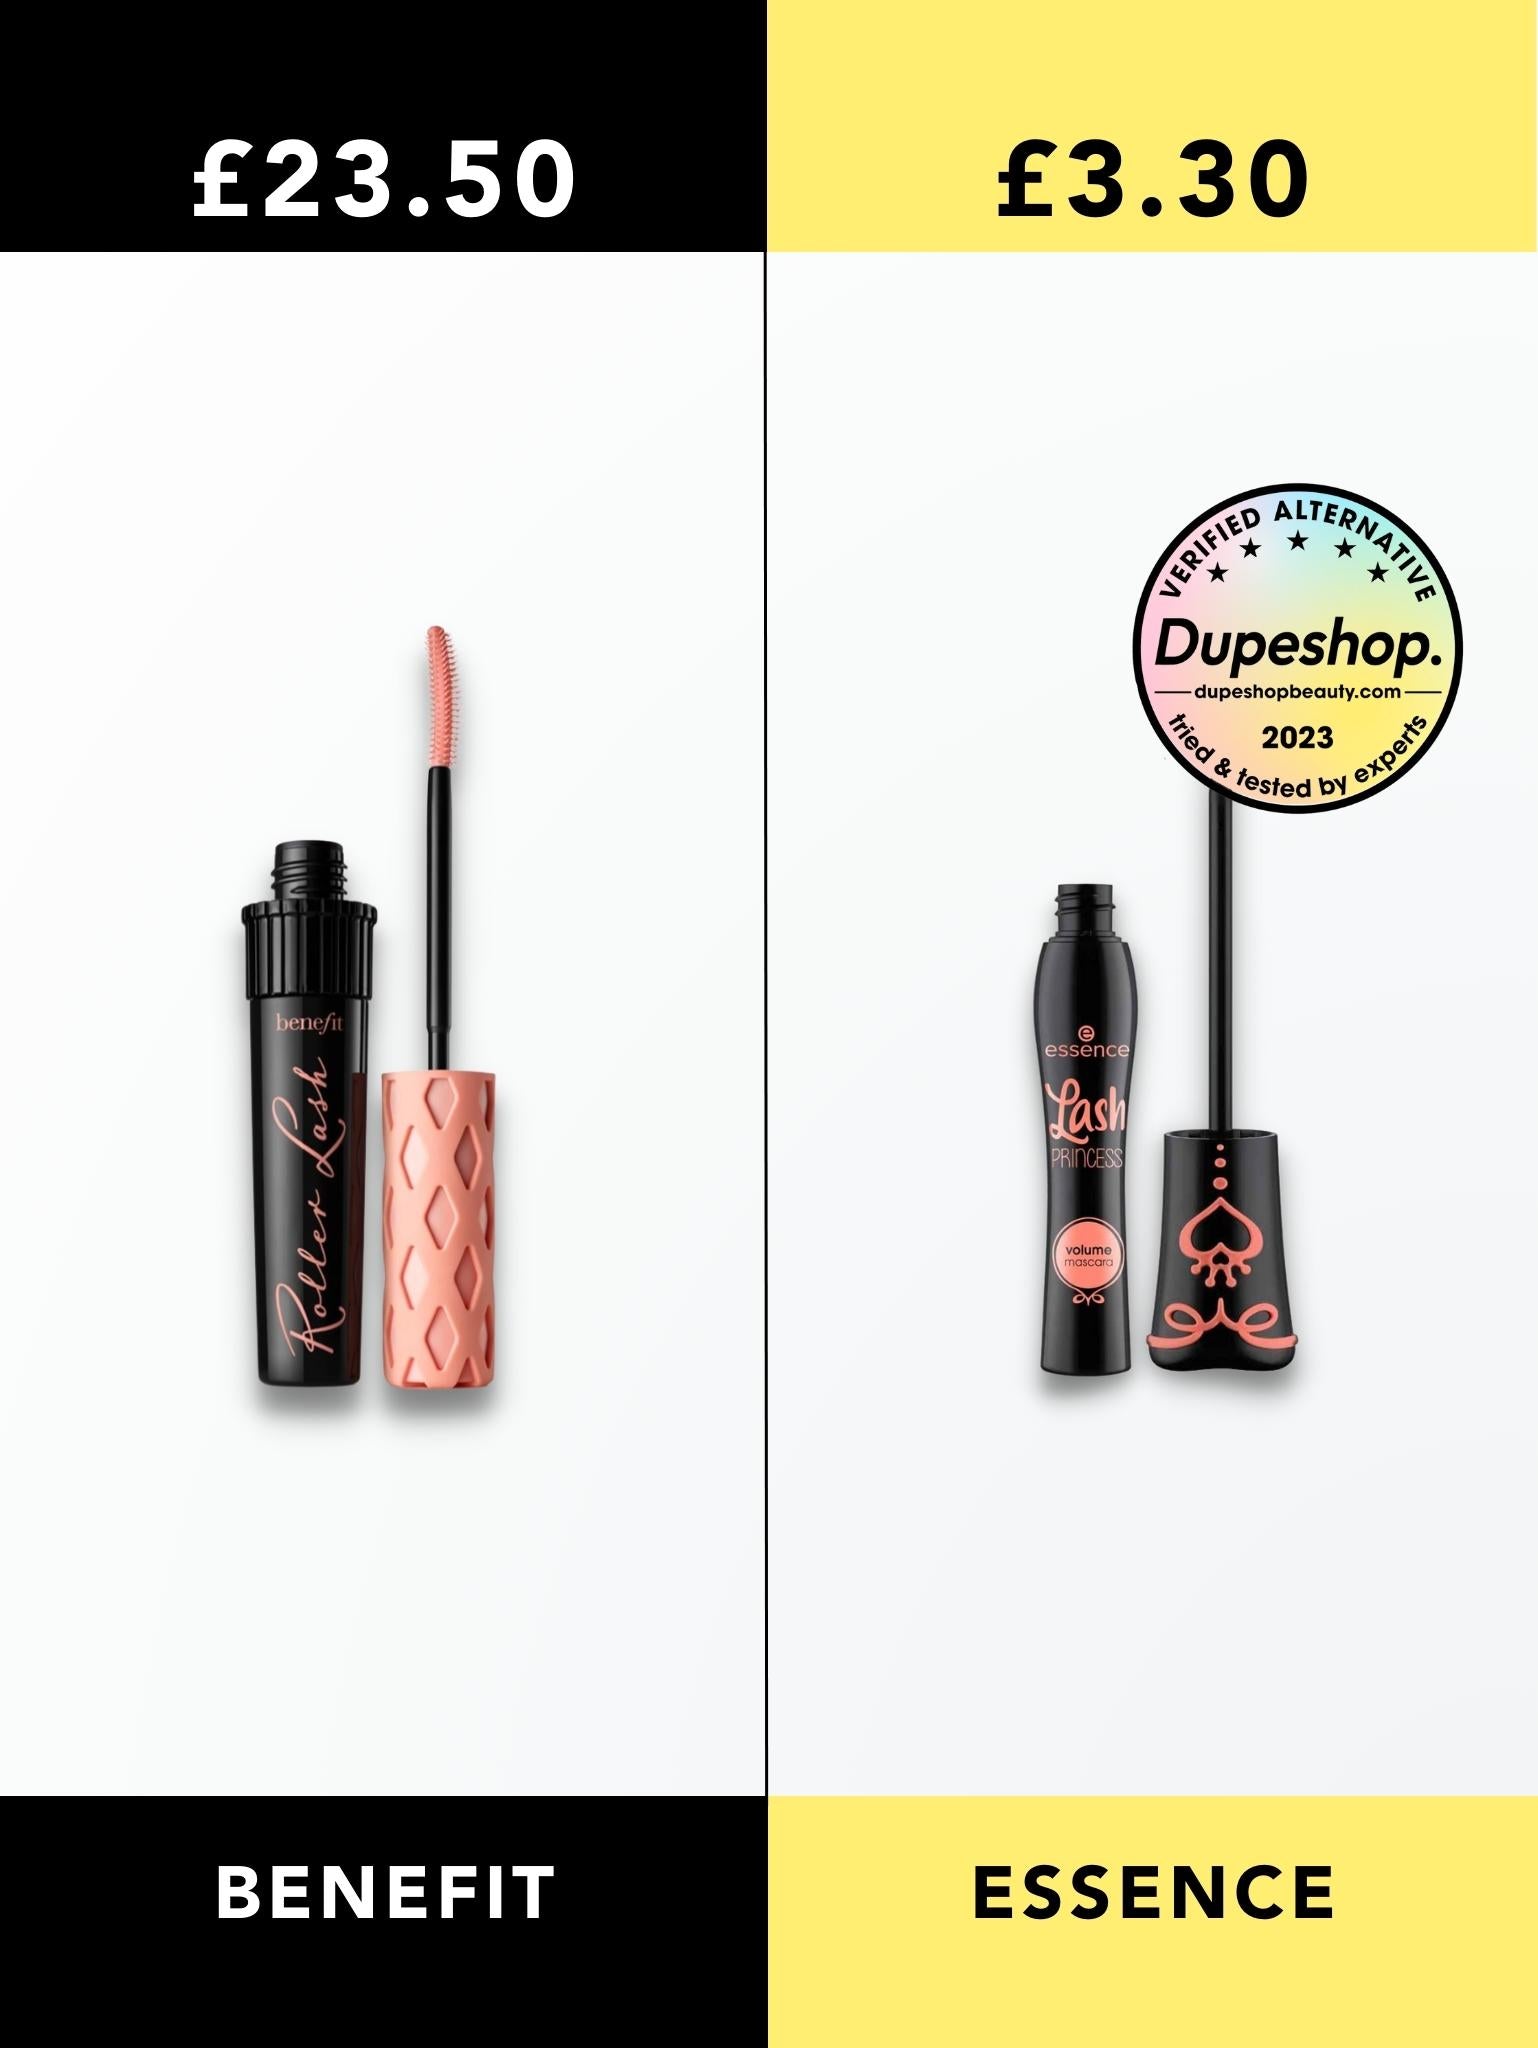 7 beauty dupes you need to know about according to Dupeshop